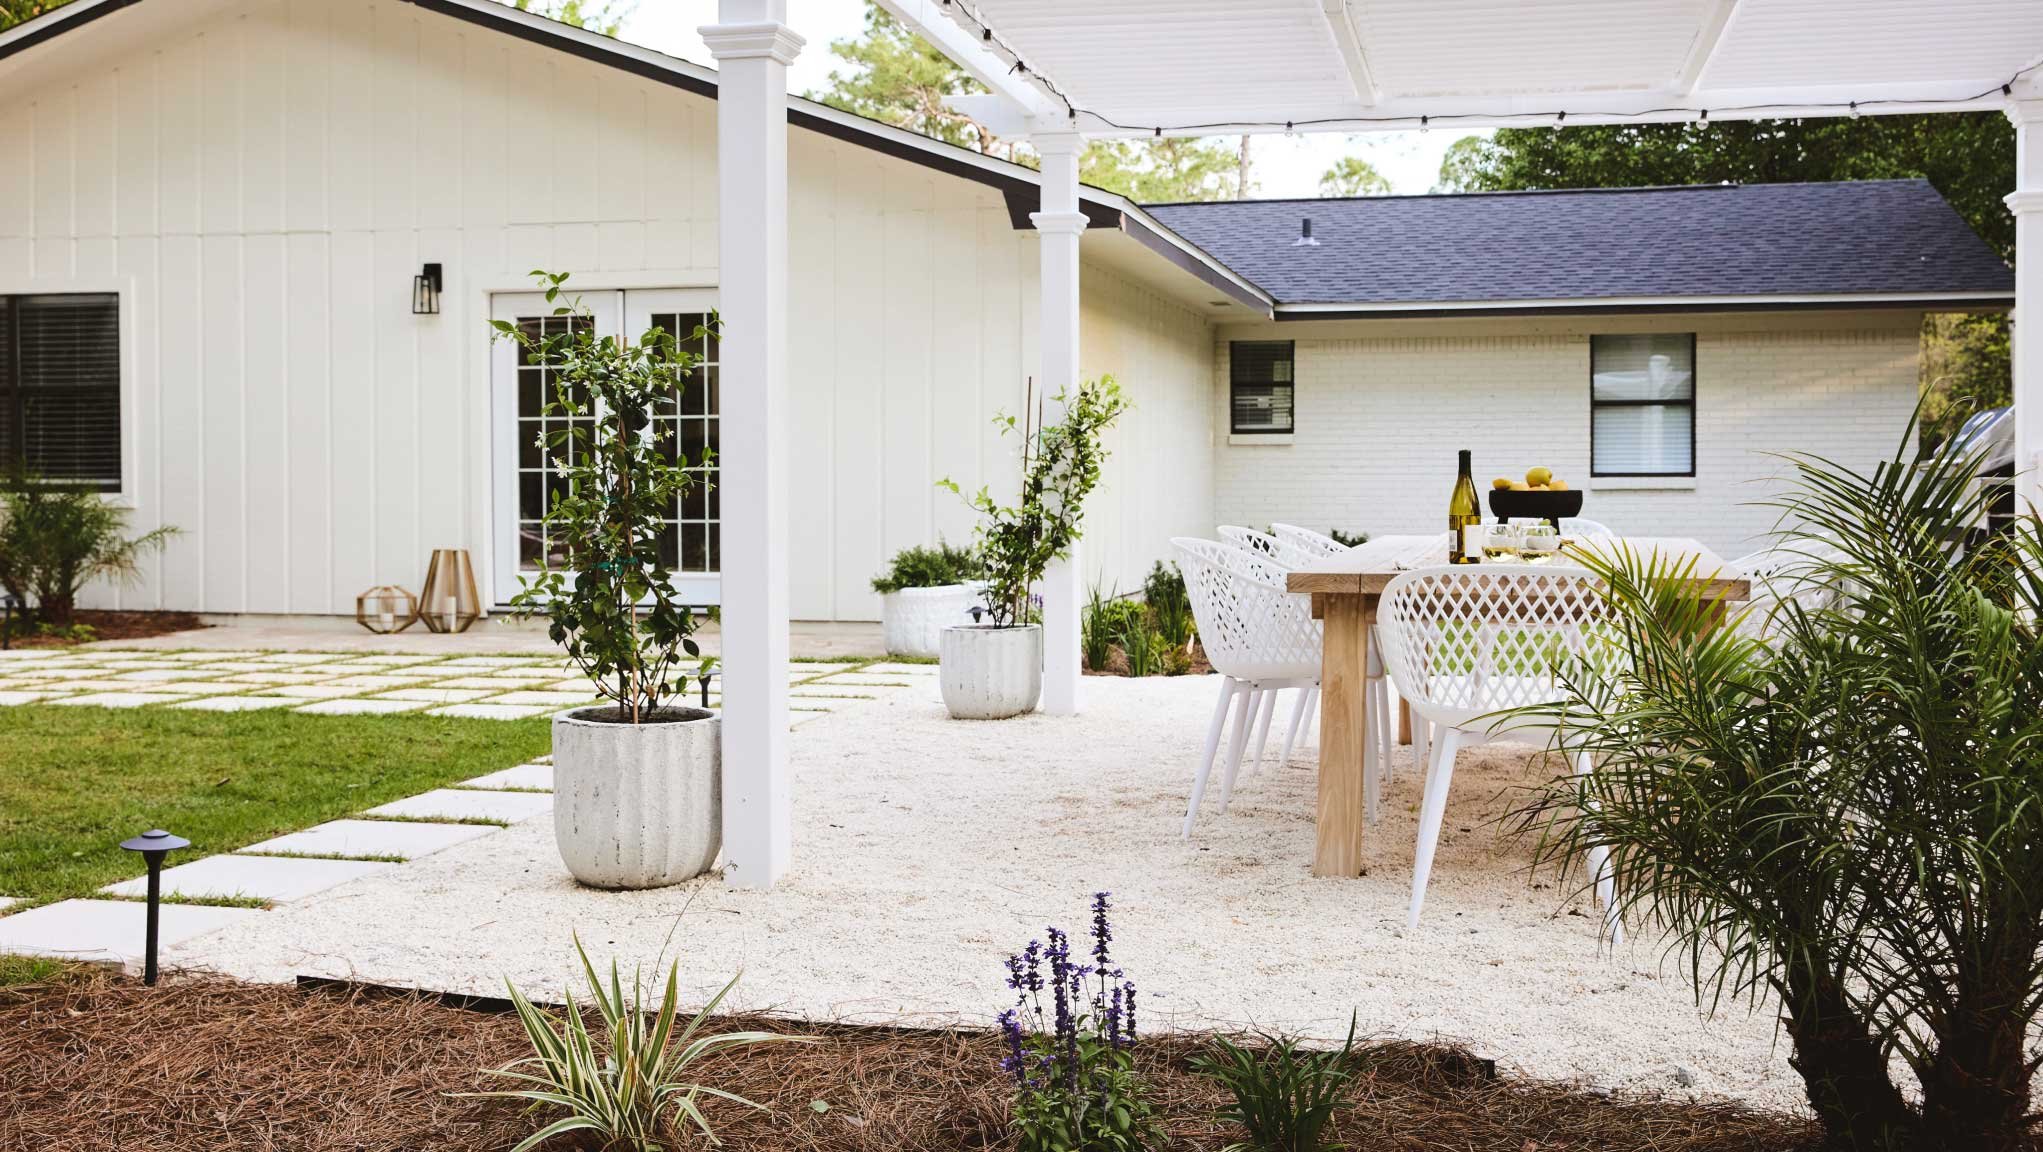 Backyard with gravel patio and dining set with planting bed in foreground